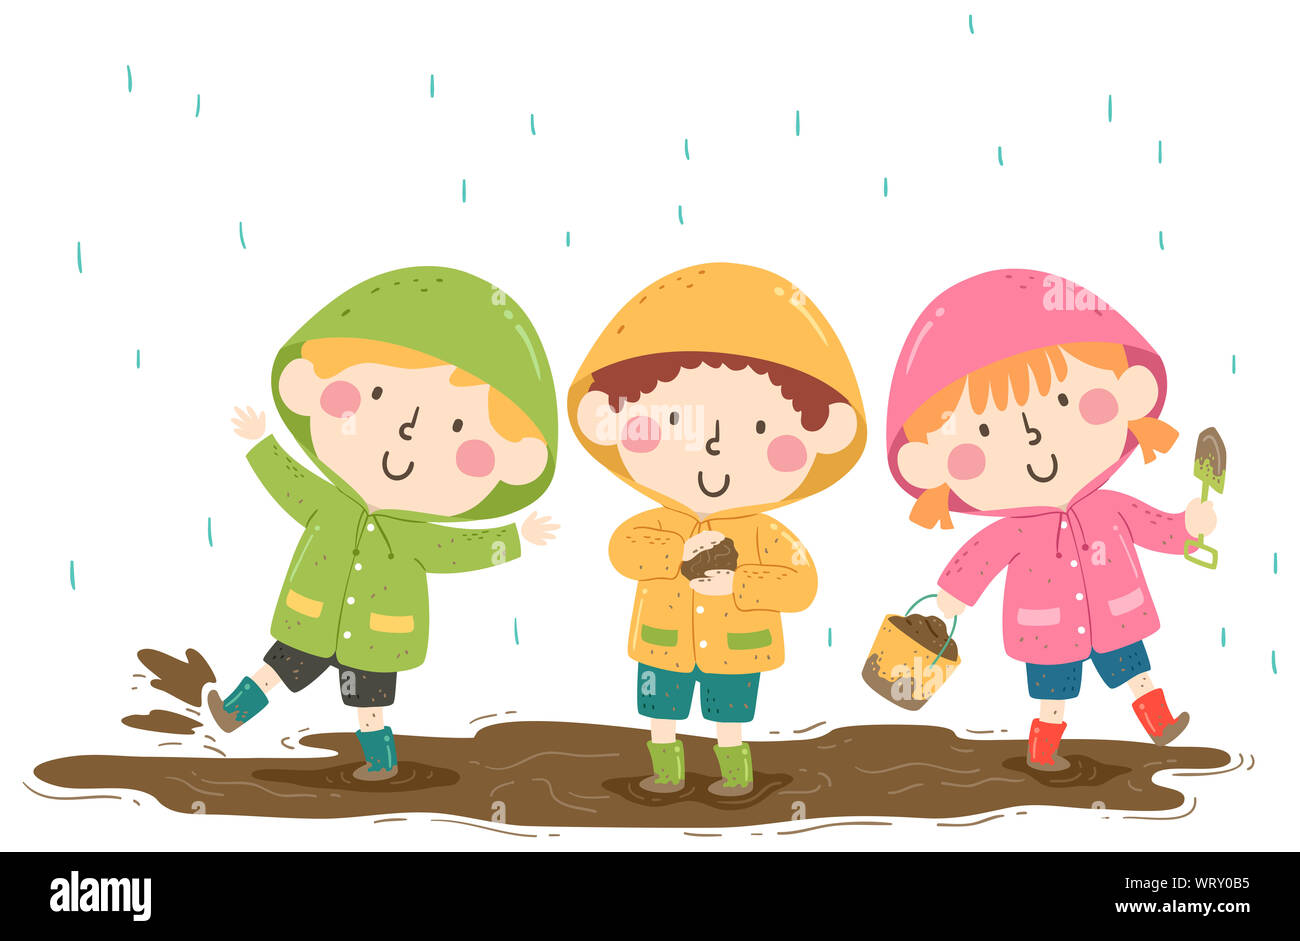 Illustration of Kids Wearing Raincoat and Boots Playing in the Mud Stock Photo